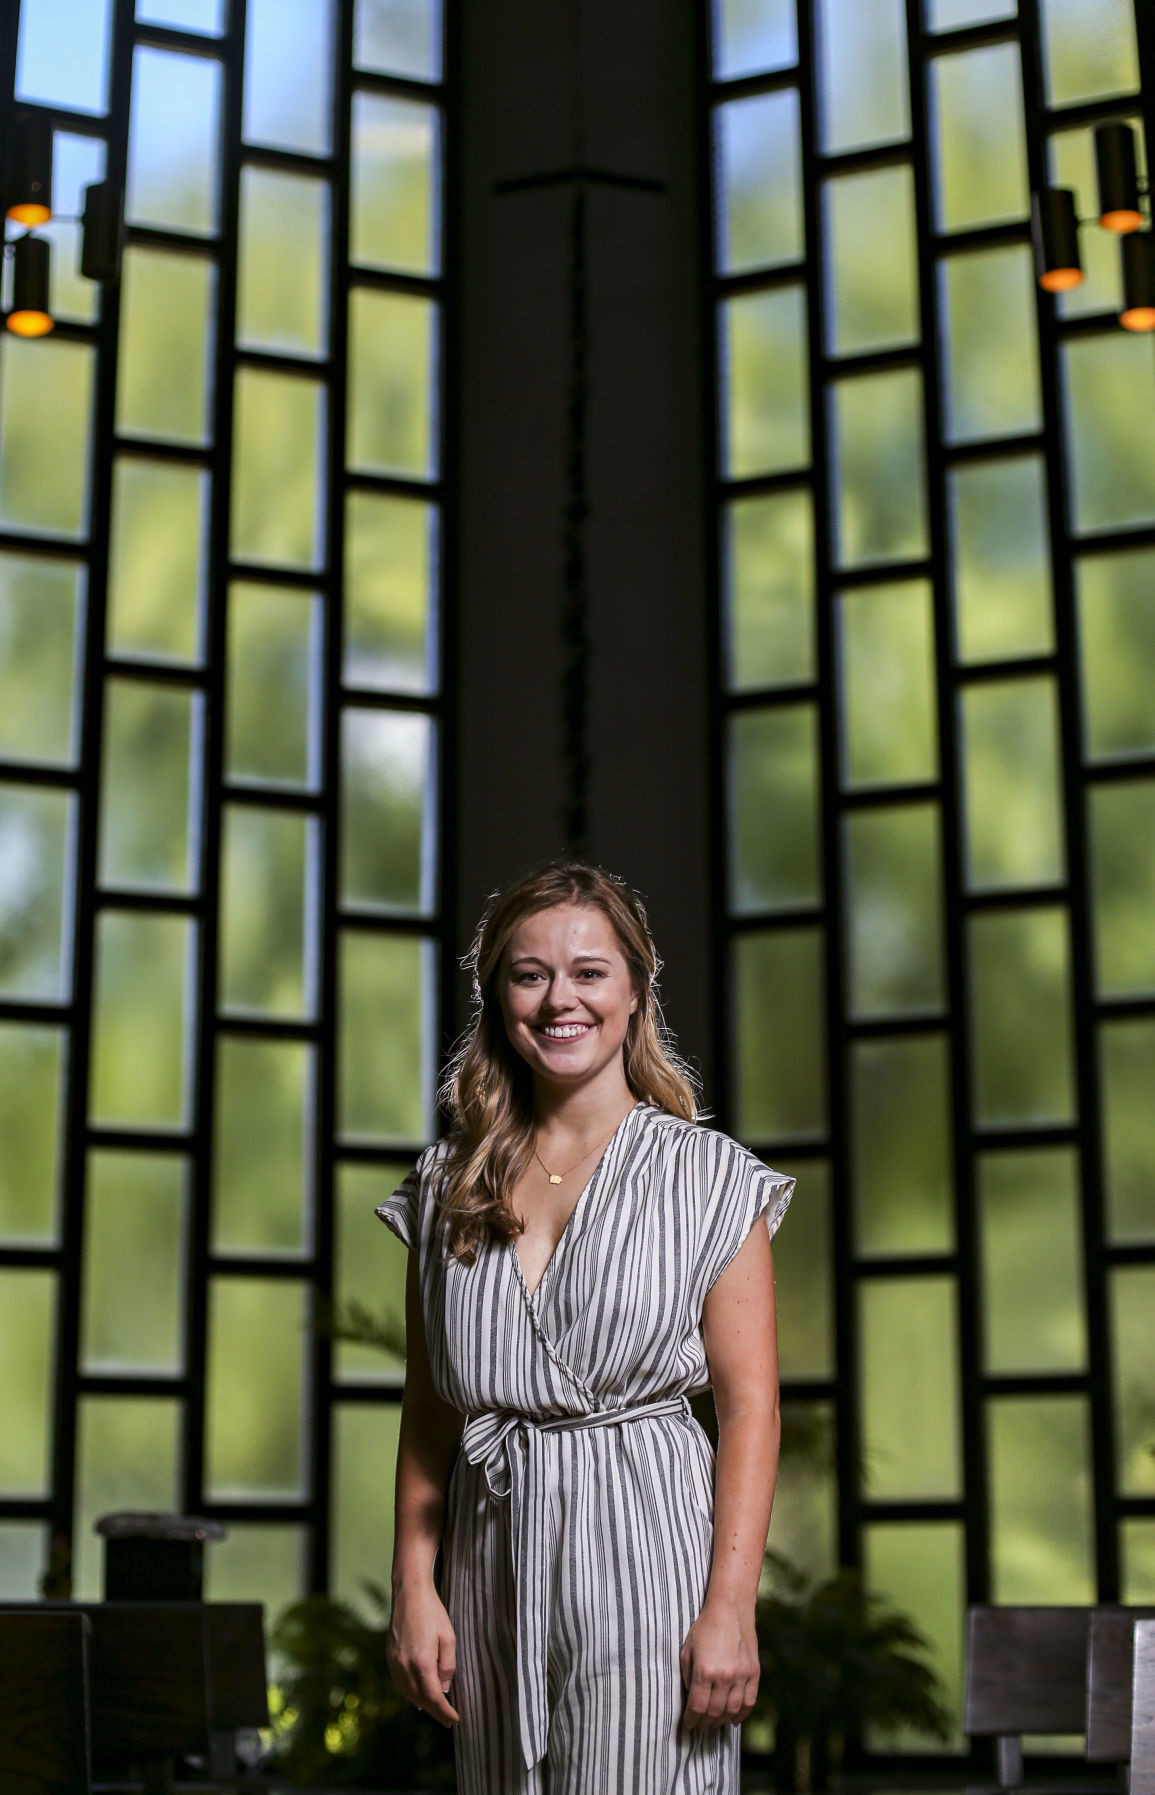 Bettendorf S Emily Tinsman The New Miss Iowa Will Sing Praises Of The Arts At Sunday Concert